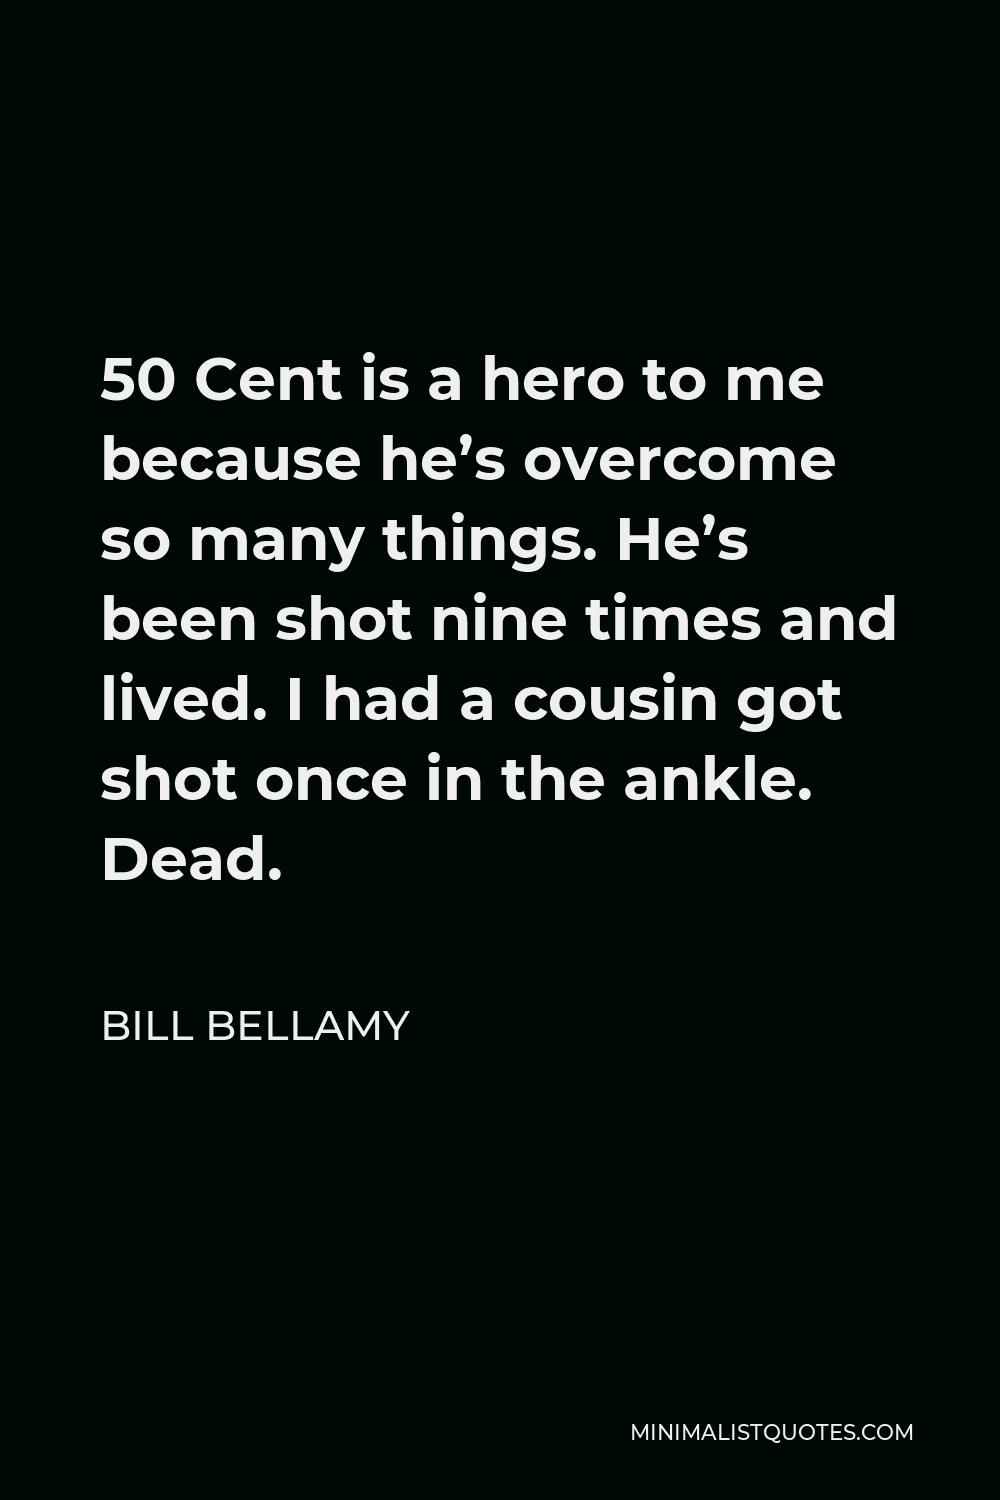 Bill Bellamy Quote - 50 Cent is a hero to me because he’s overcome so many things. He’s been shot nine times and lived. I had a cousin got shot once in the ankle. Dead.